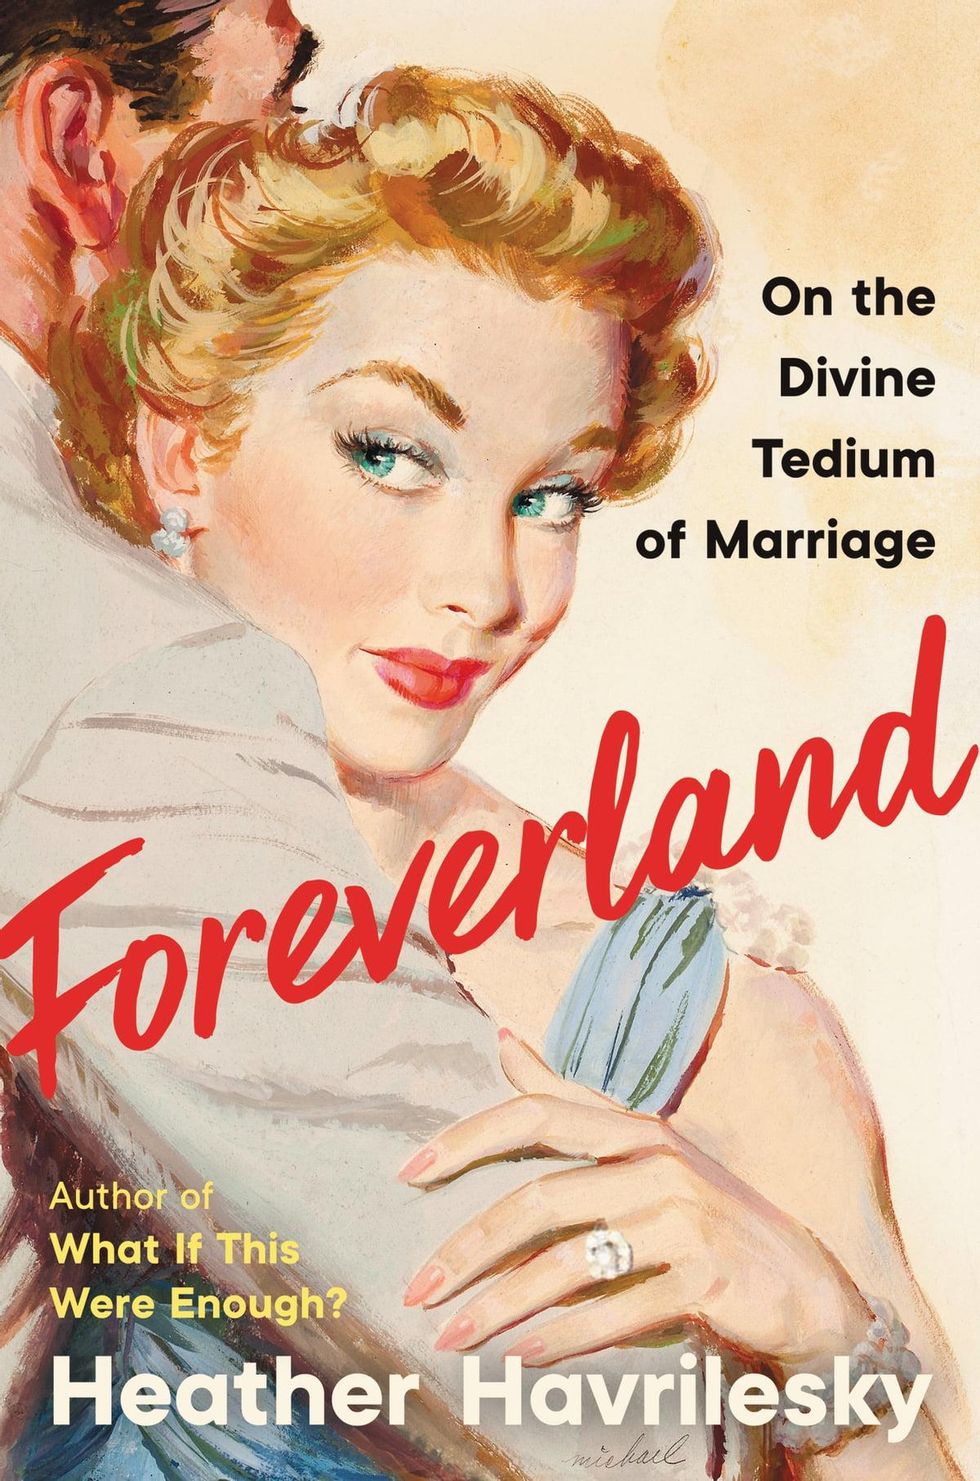 Foreverland: The Divine Tedium of Marriage by Heather Havrilesky